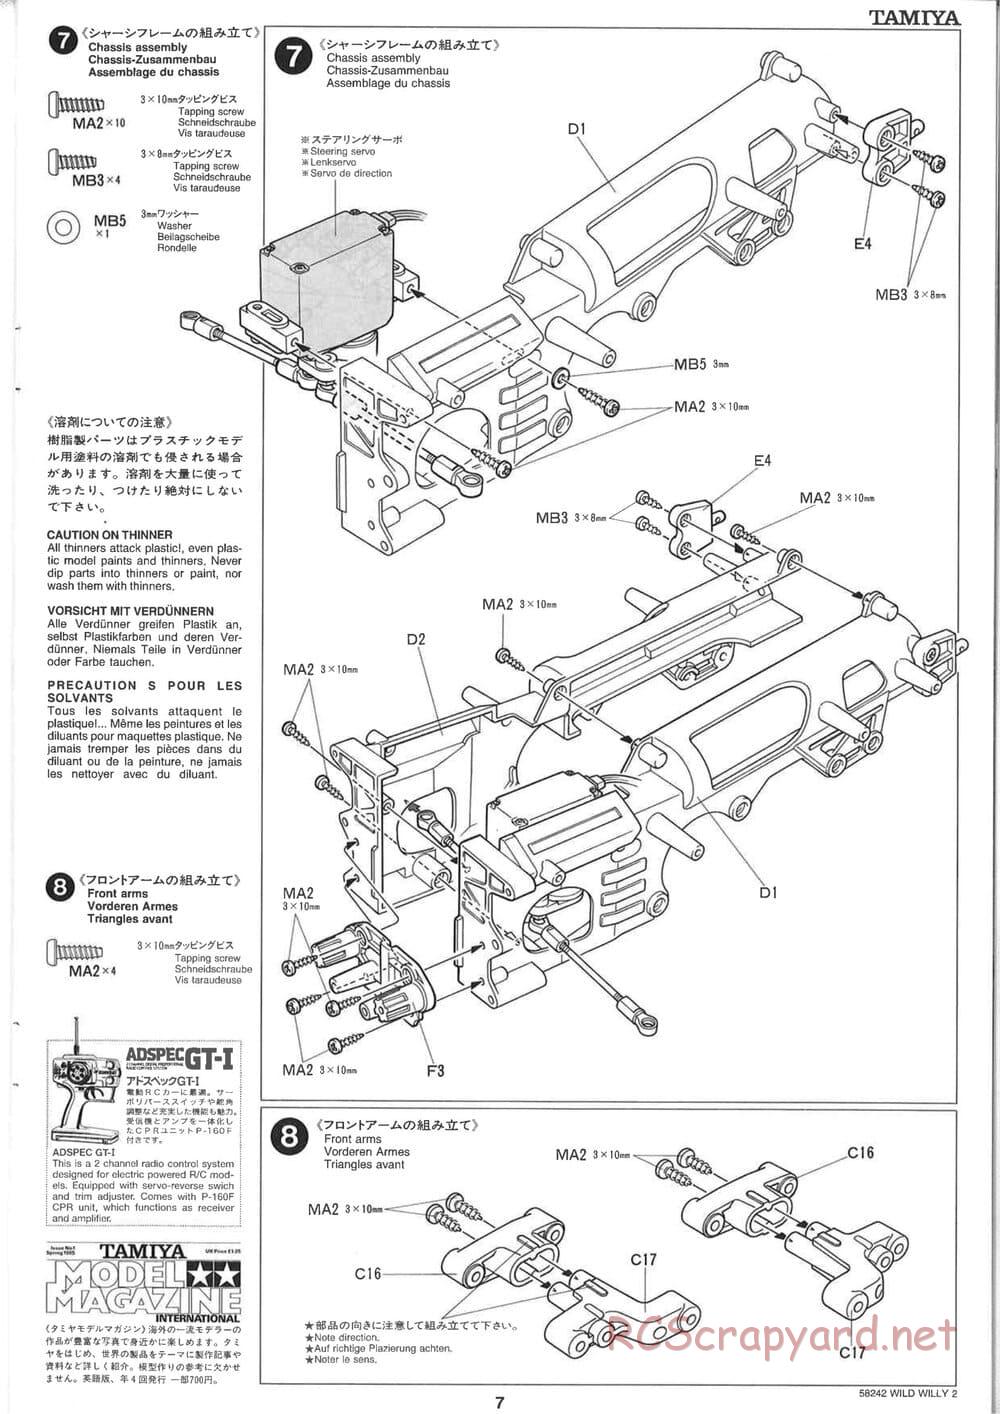 Tamiya - Wild Willy 2 - WR-02 Chassis - Manual - Page 7